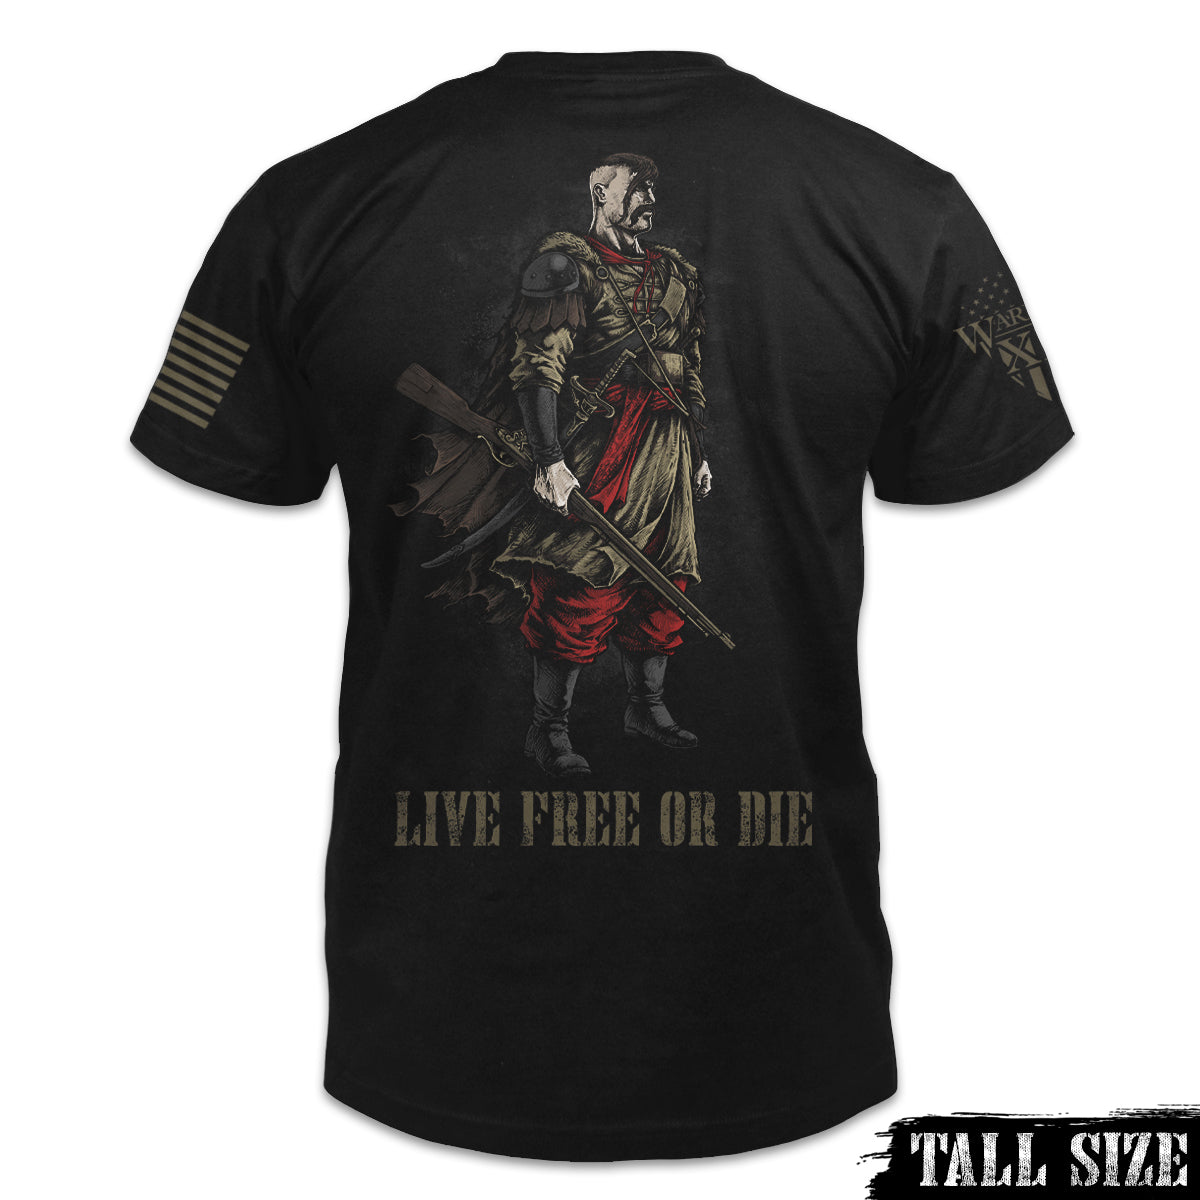 A black tall sized shirt with a cossack warrior with the words "live free or die" printed on the back of the shirt.